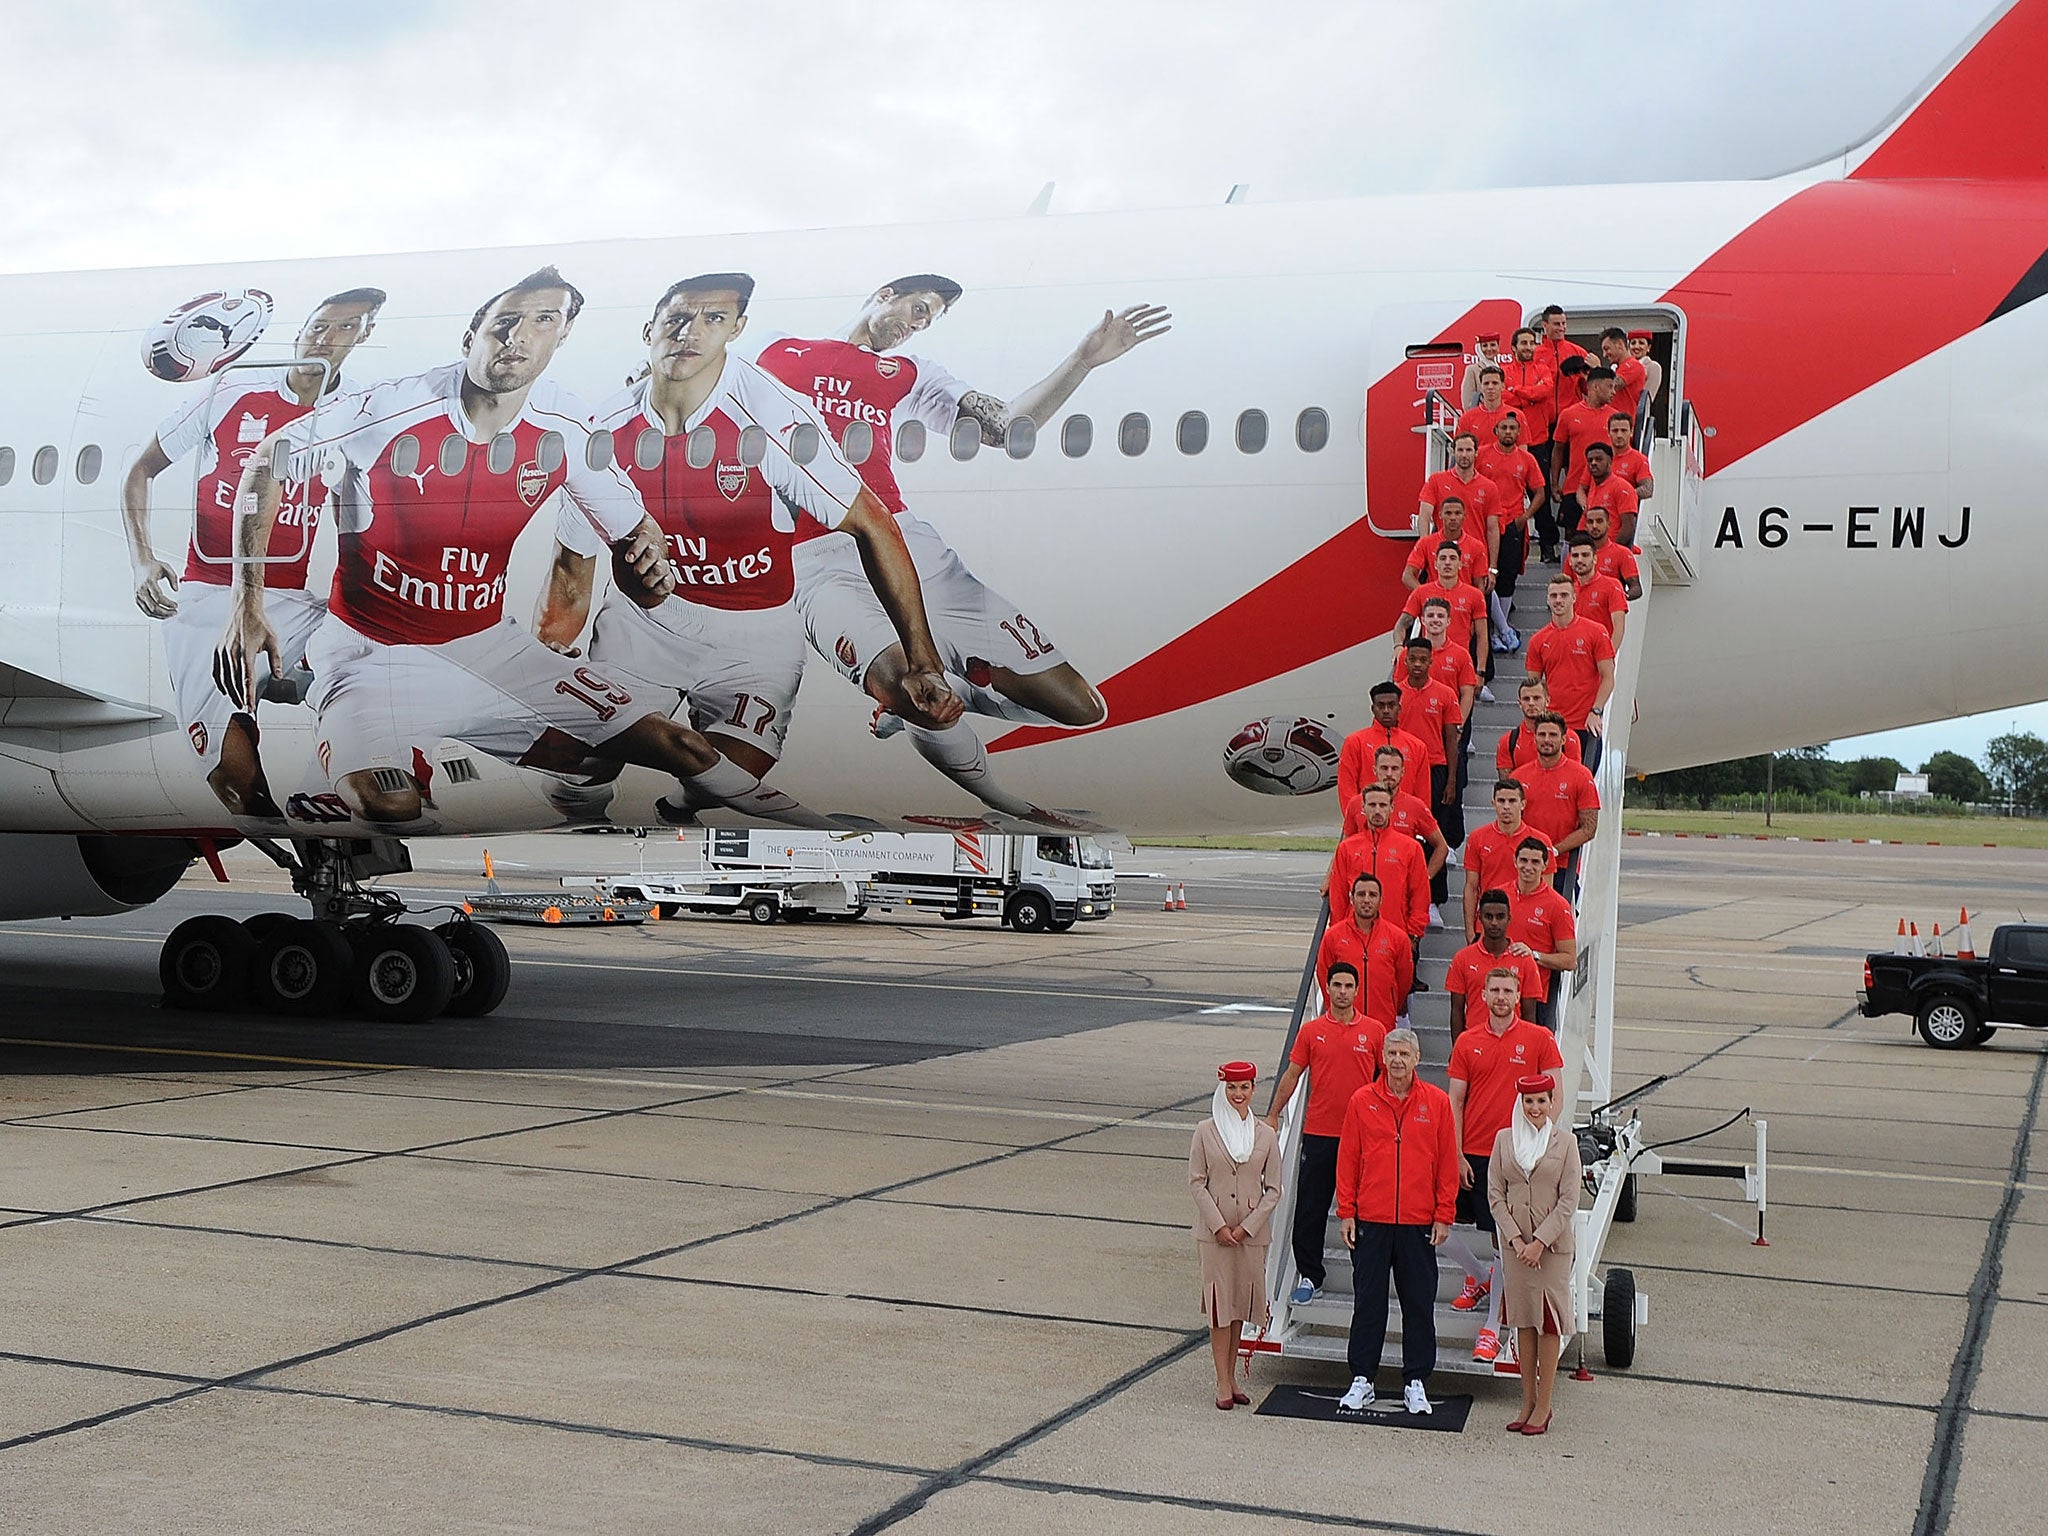 Arsenal will take a 14-minute flight from Luton to Norwich